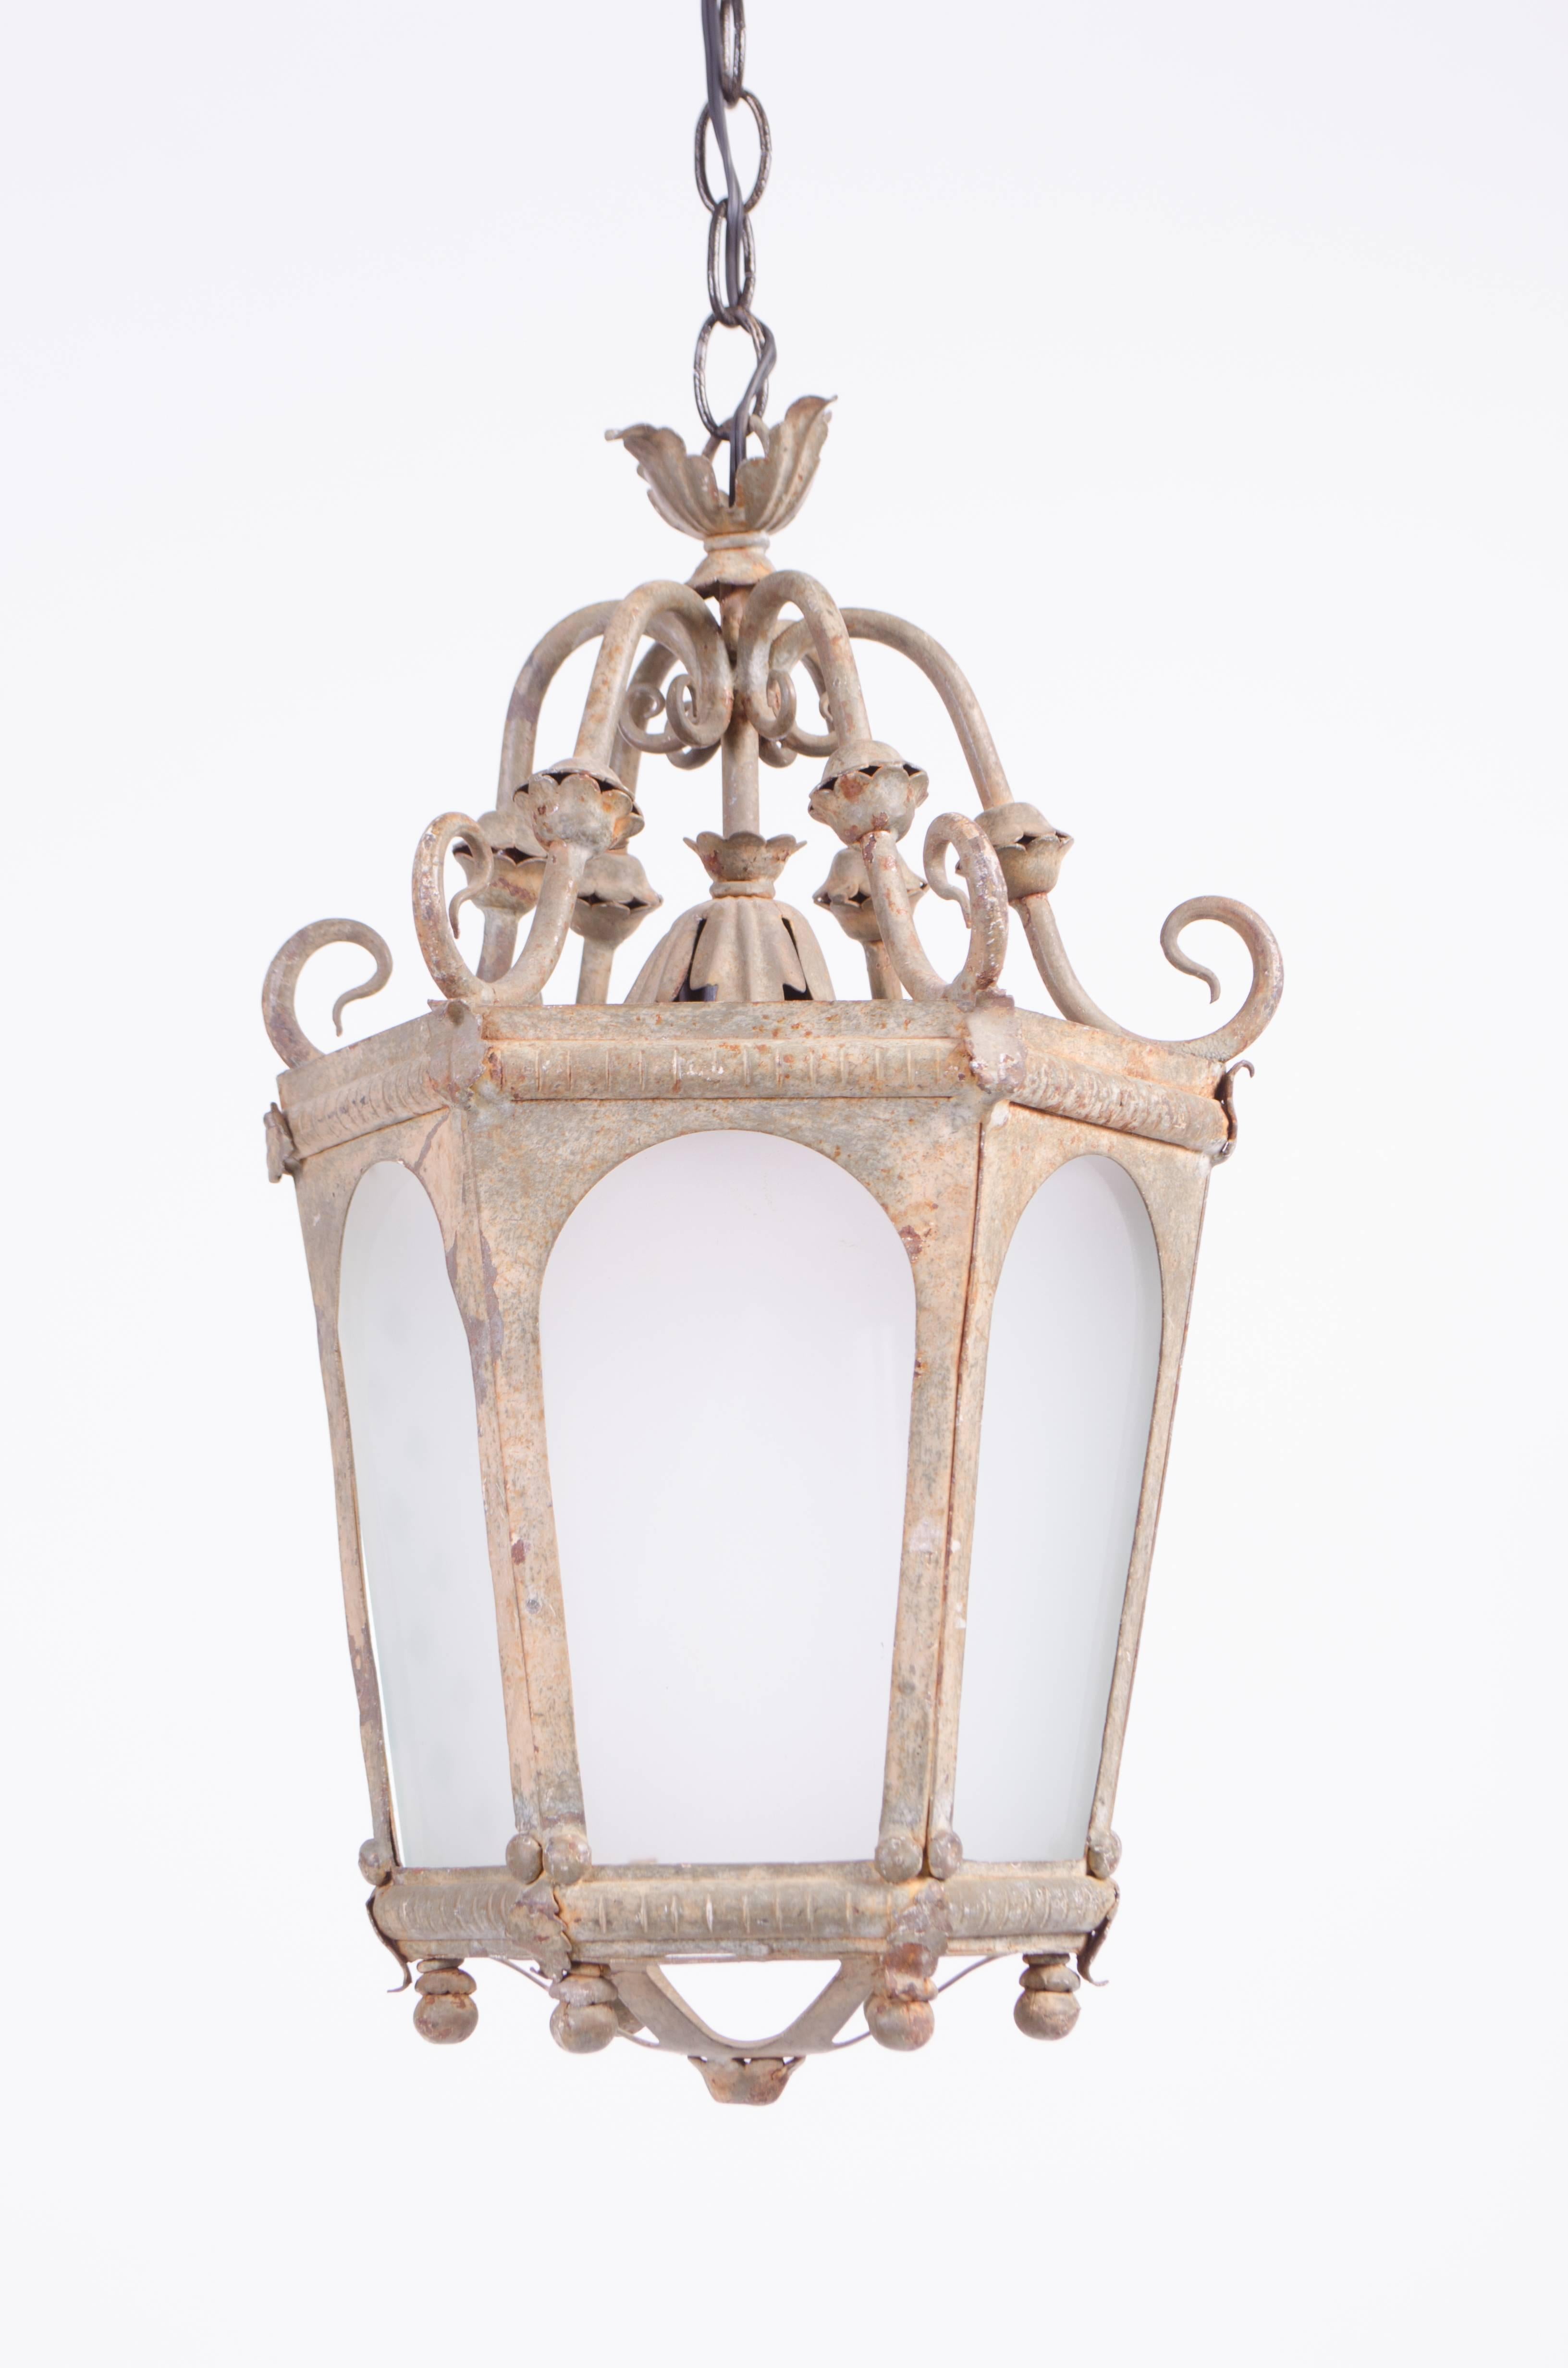 A pair of fabulously patinated French hanging lanterns with excellent detailing and ornamentation. All metalwork is intact, astonishing for pieces of this age. these have been re-wired for modern day usage, adding a certain level of French charm